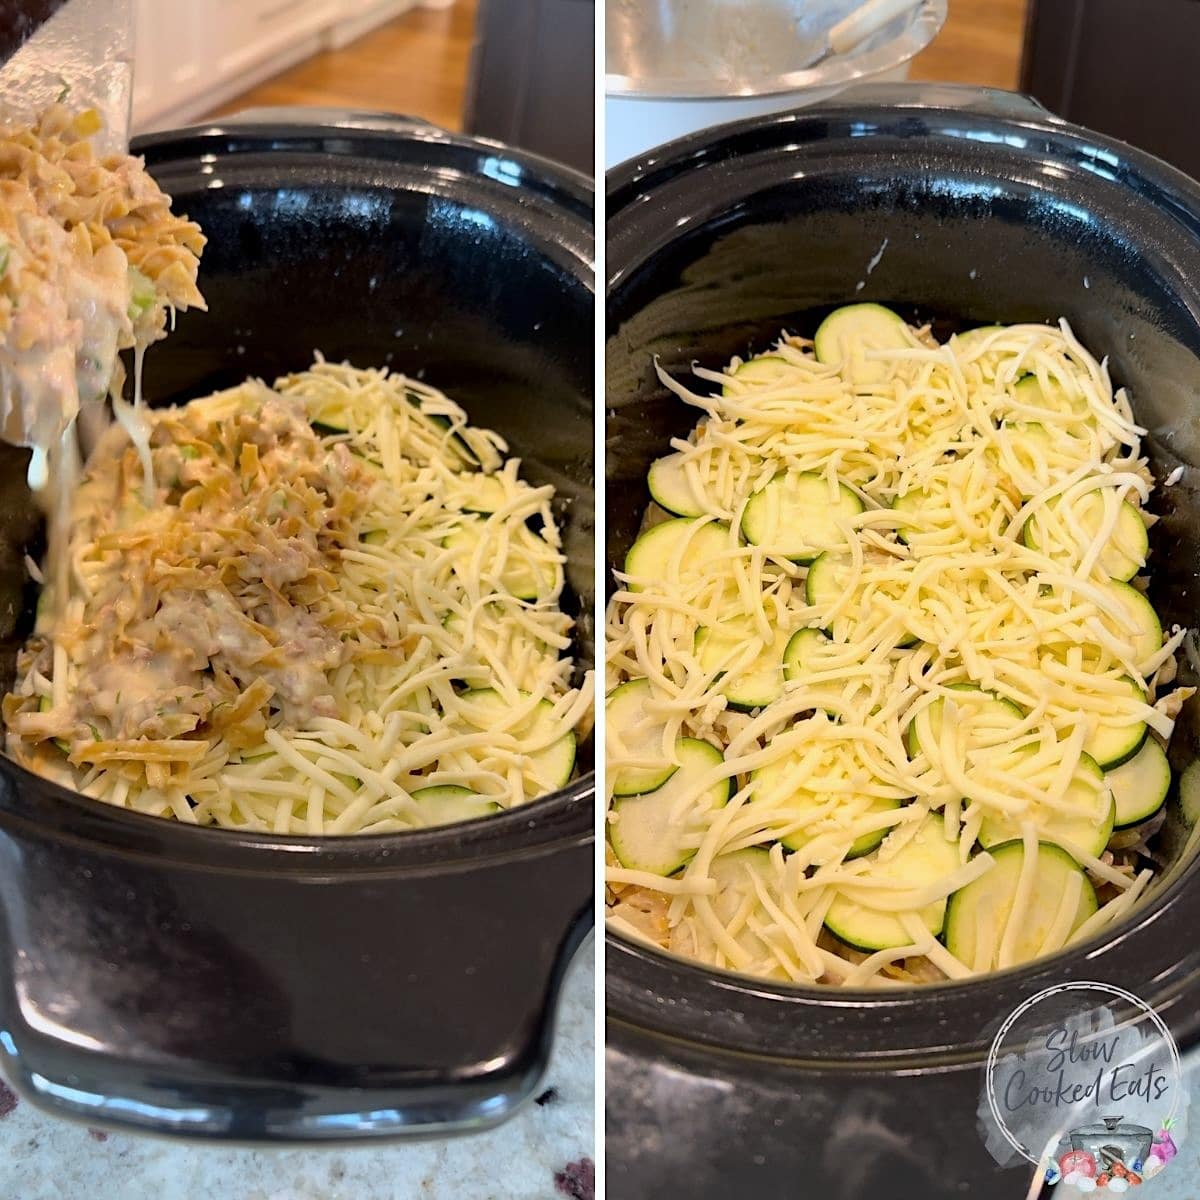 Layering the tuna noodle casserole ingredients in a black oval crockpot.